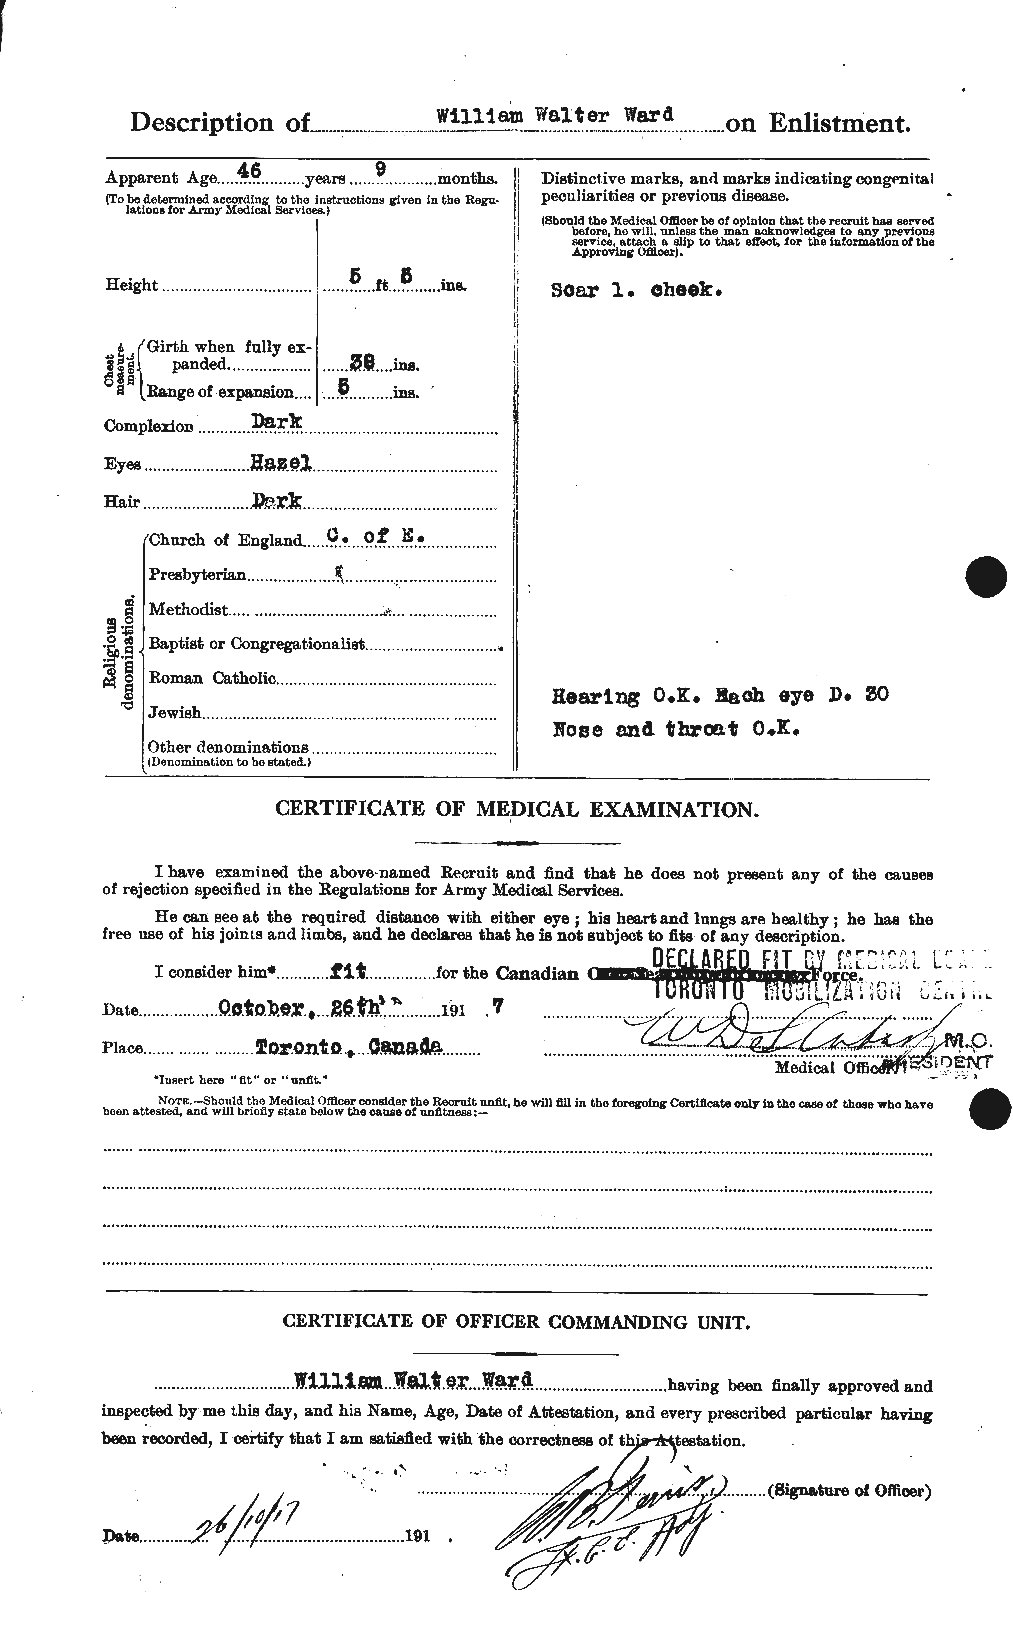 Personnel Records of the First World War - CEF 659847b